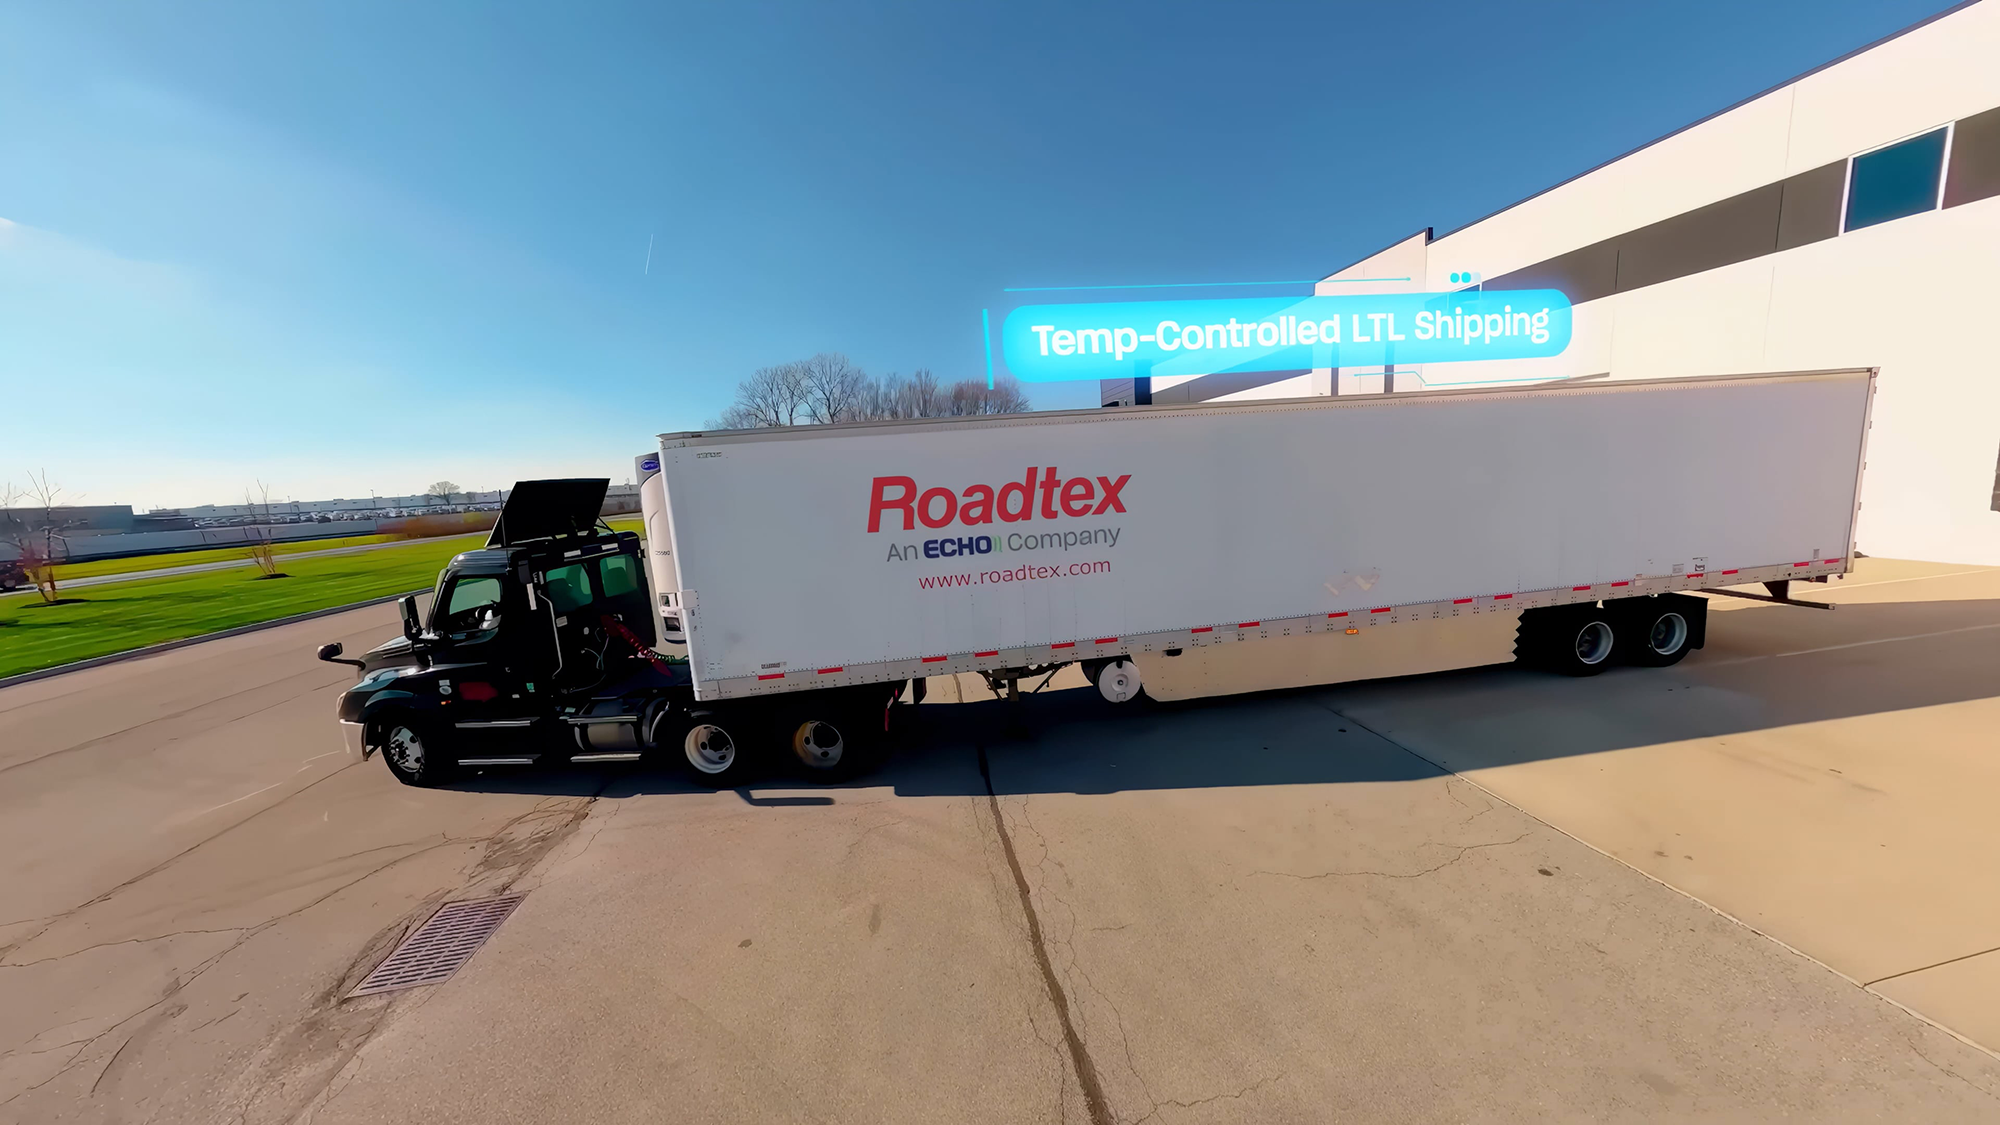 Roadtex branded semi truck backing up to warehouse facility